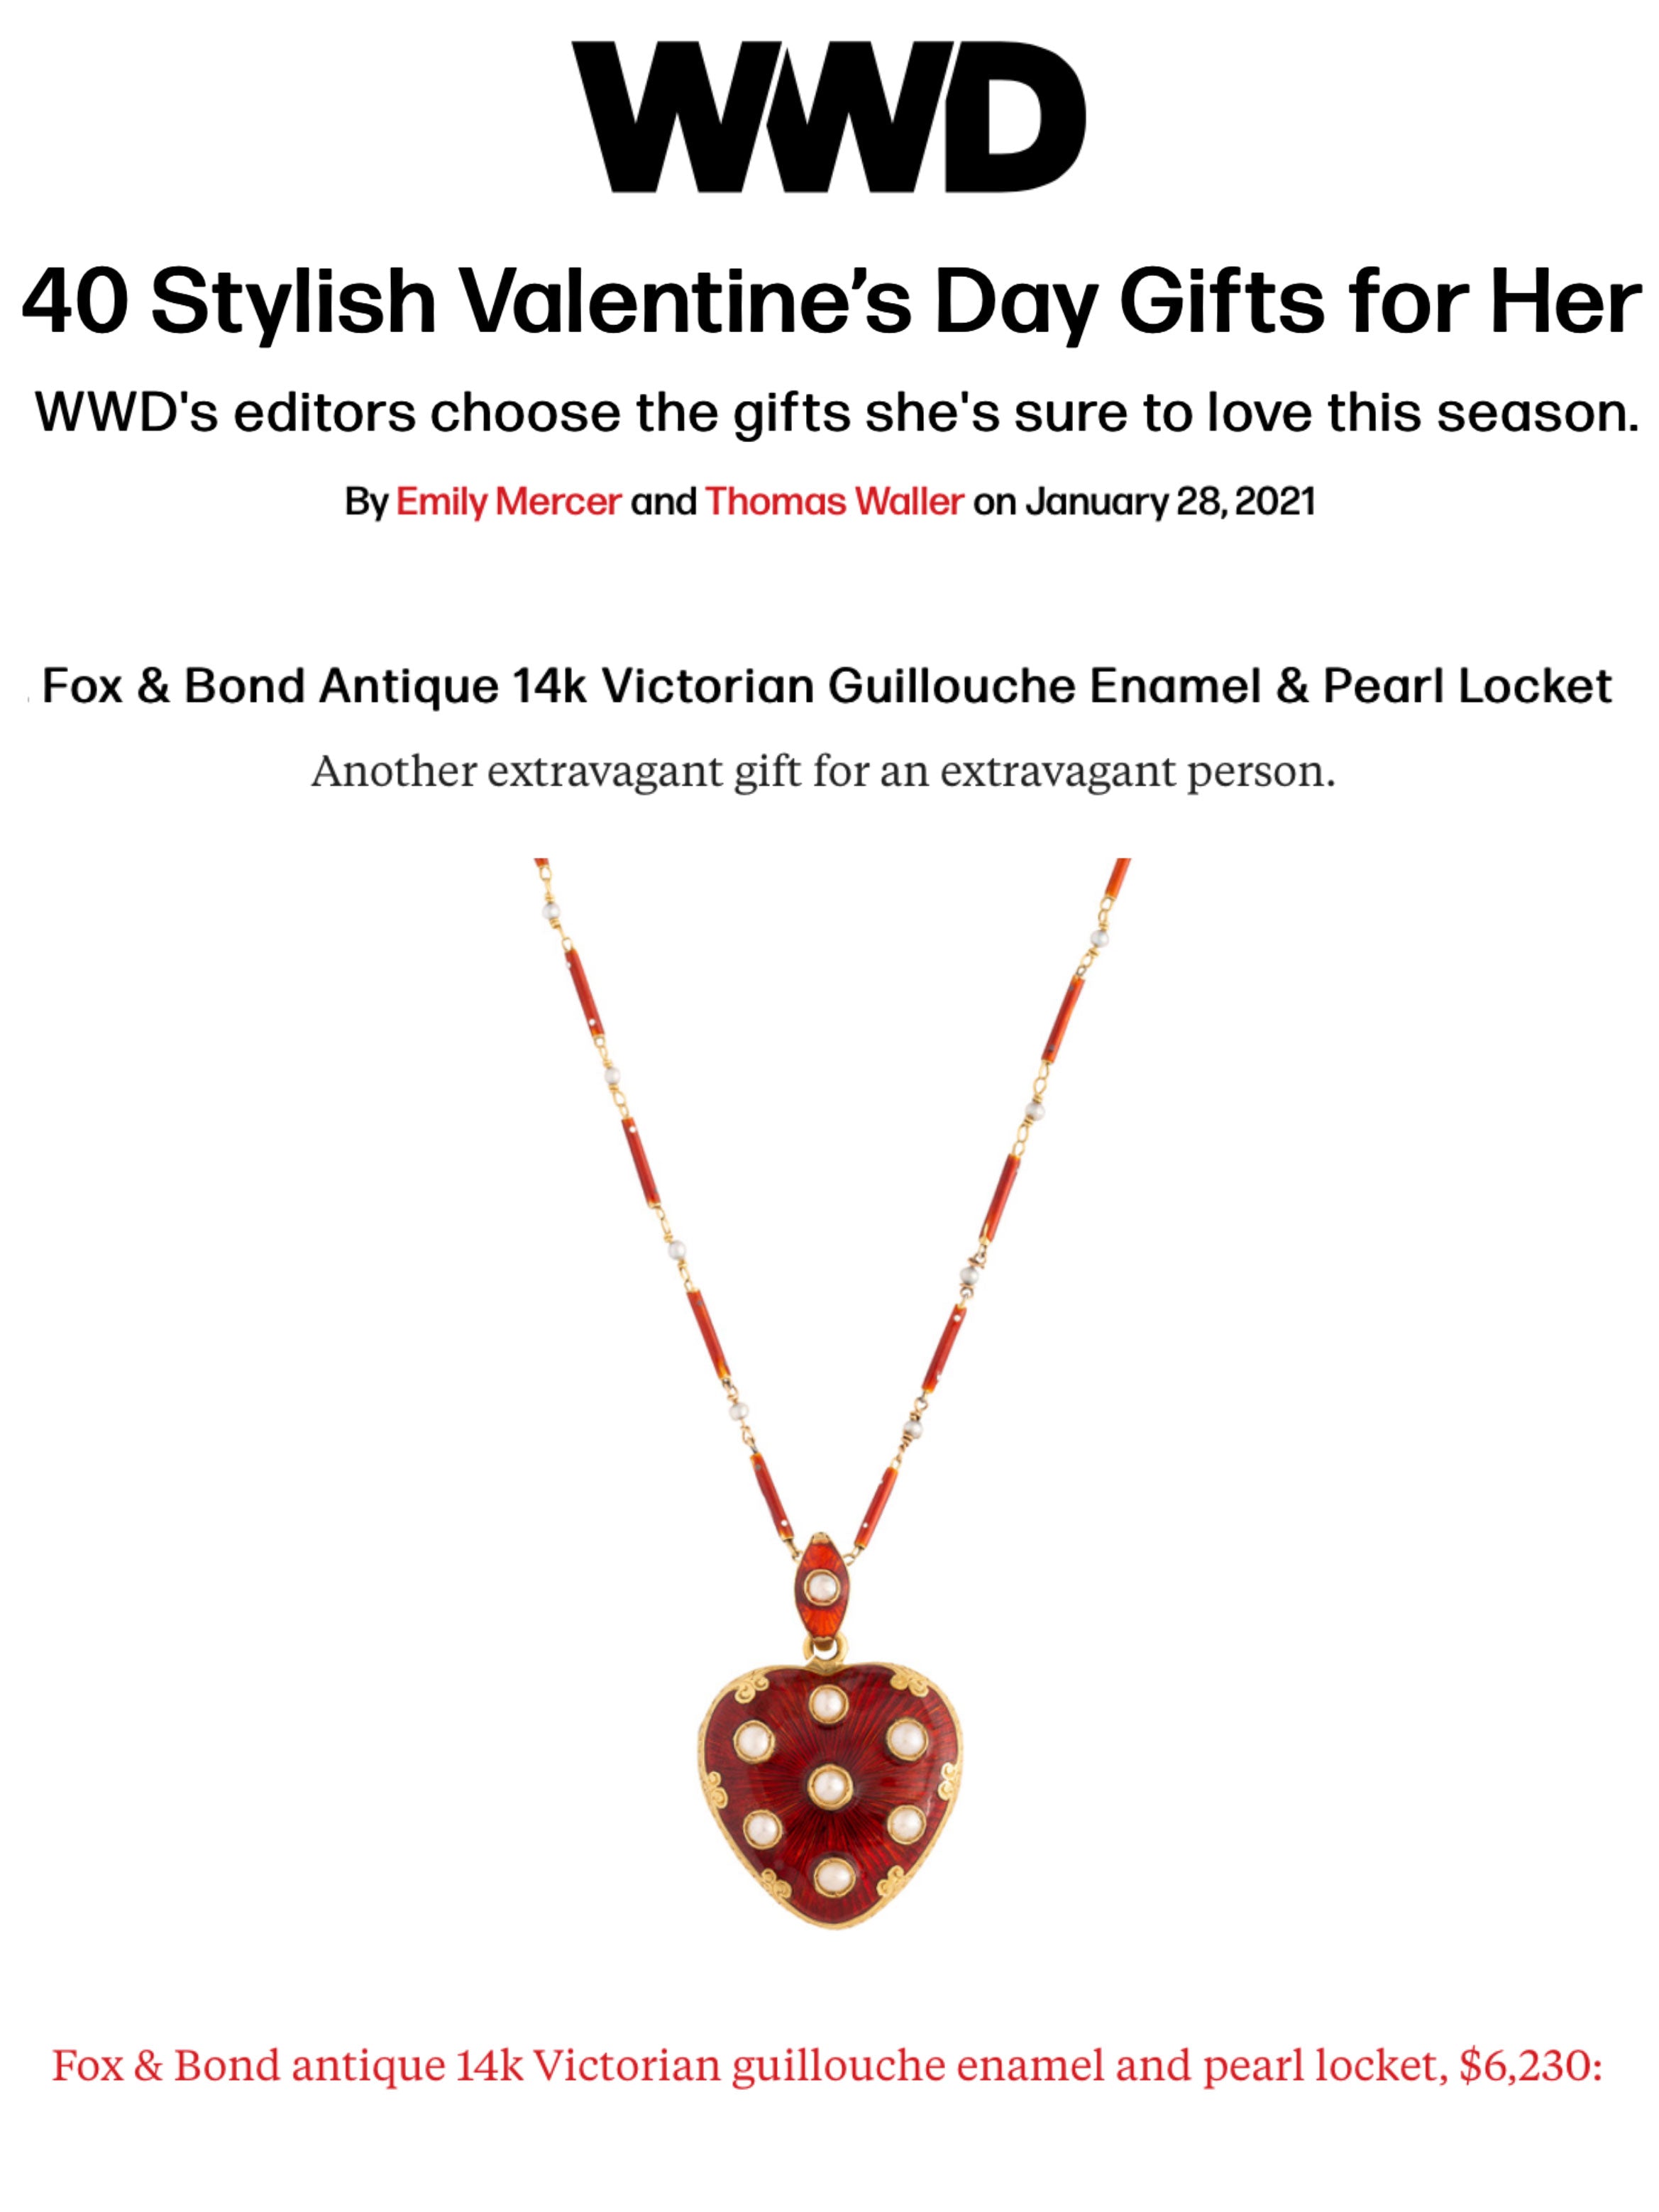 WWD: 40 Stylish Valentine’s Day Gifts for Her